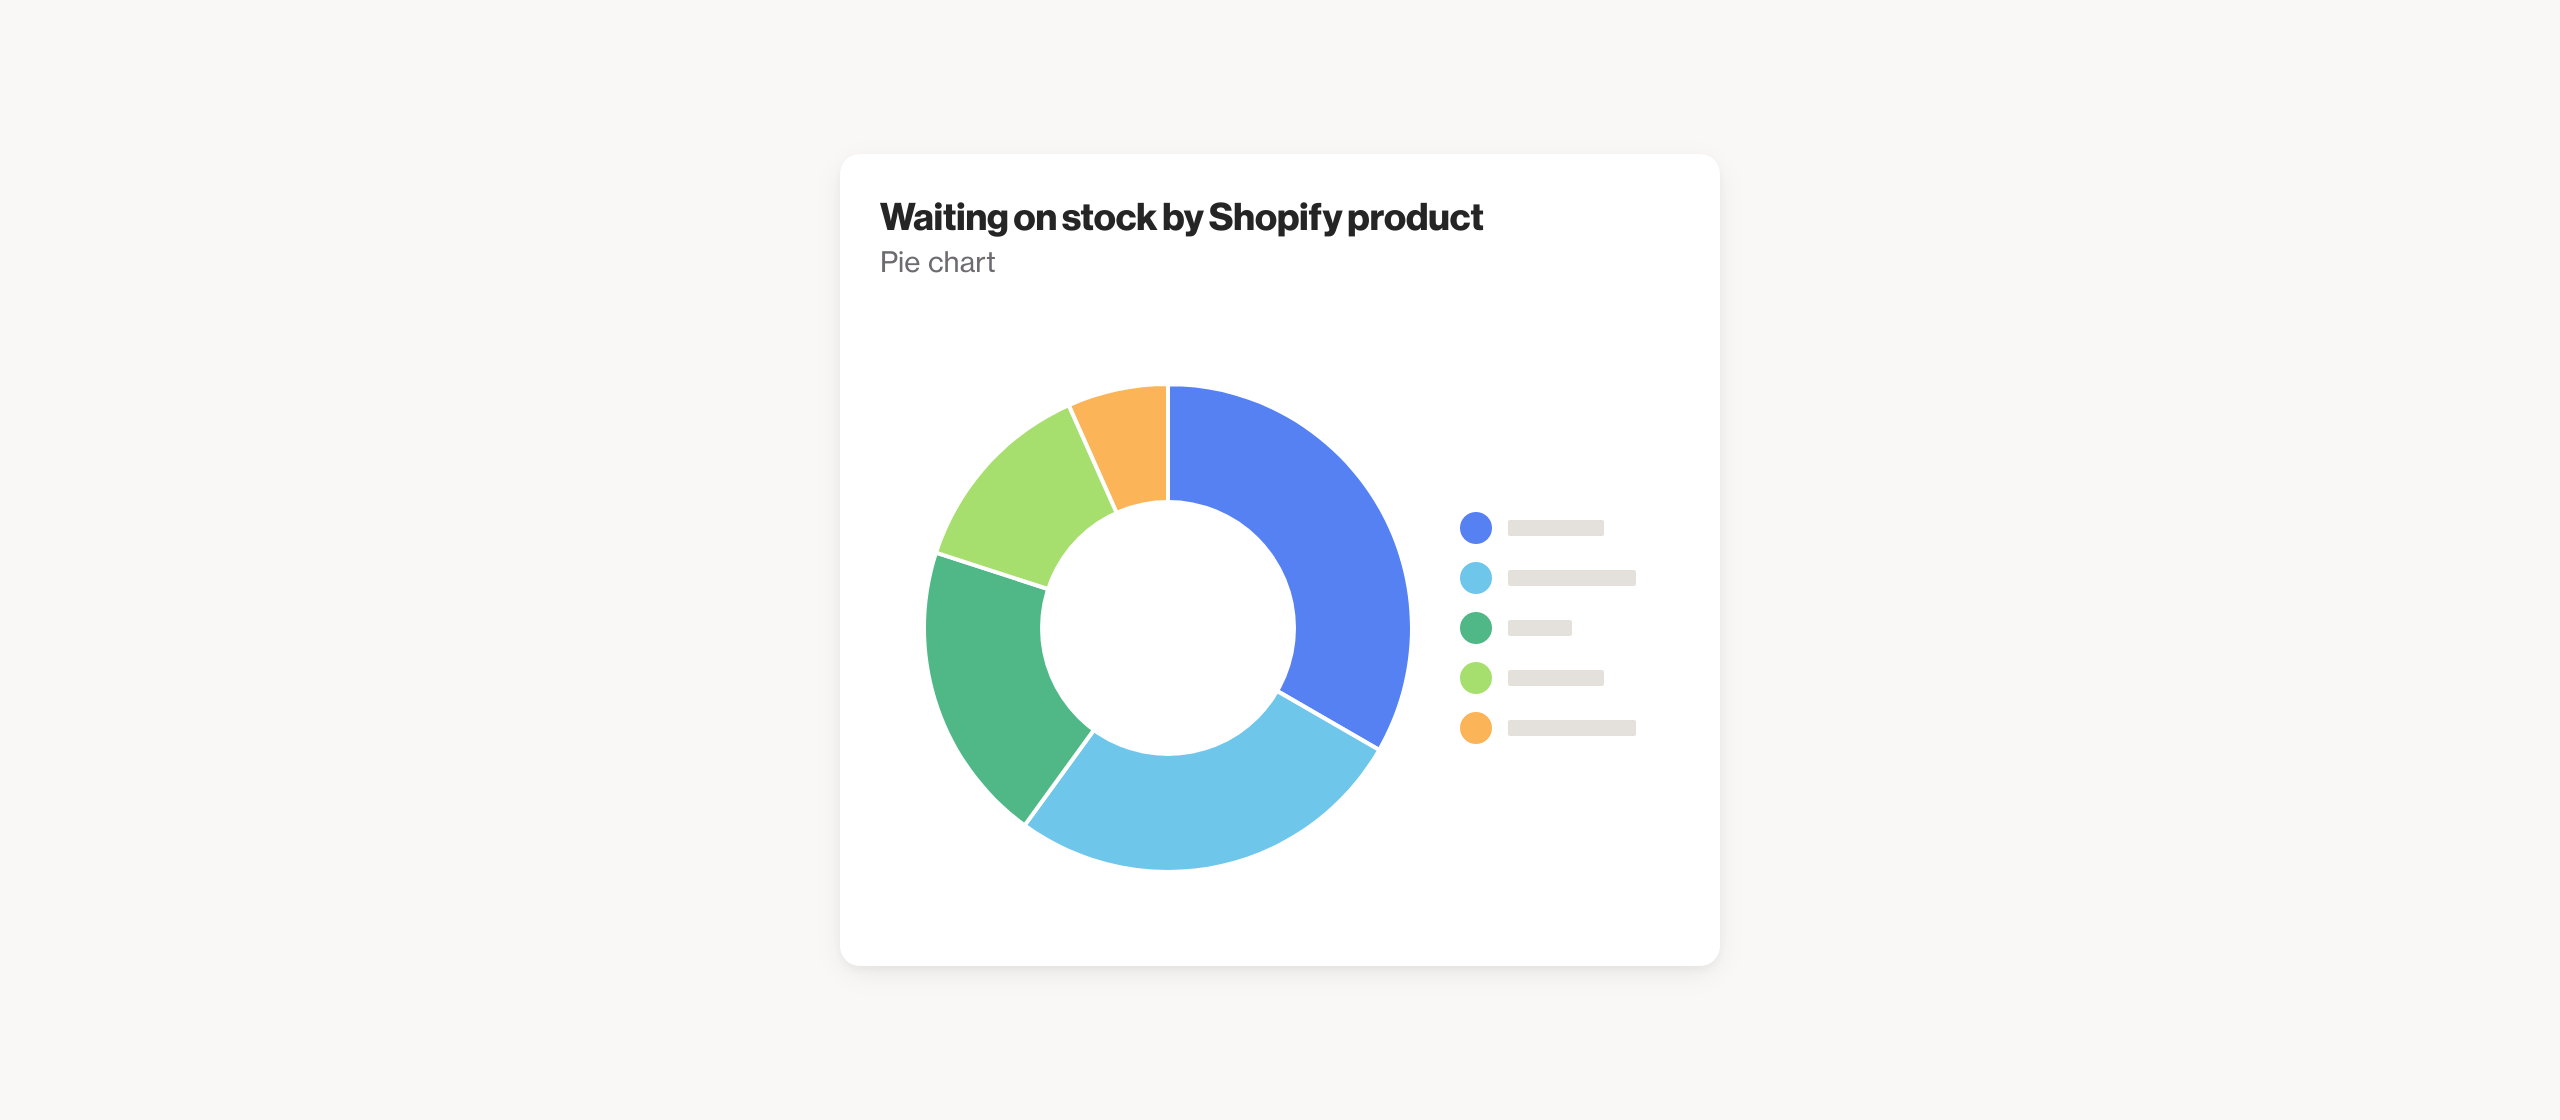 Waiting on stock by Shopify product